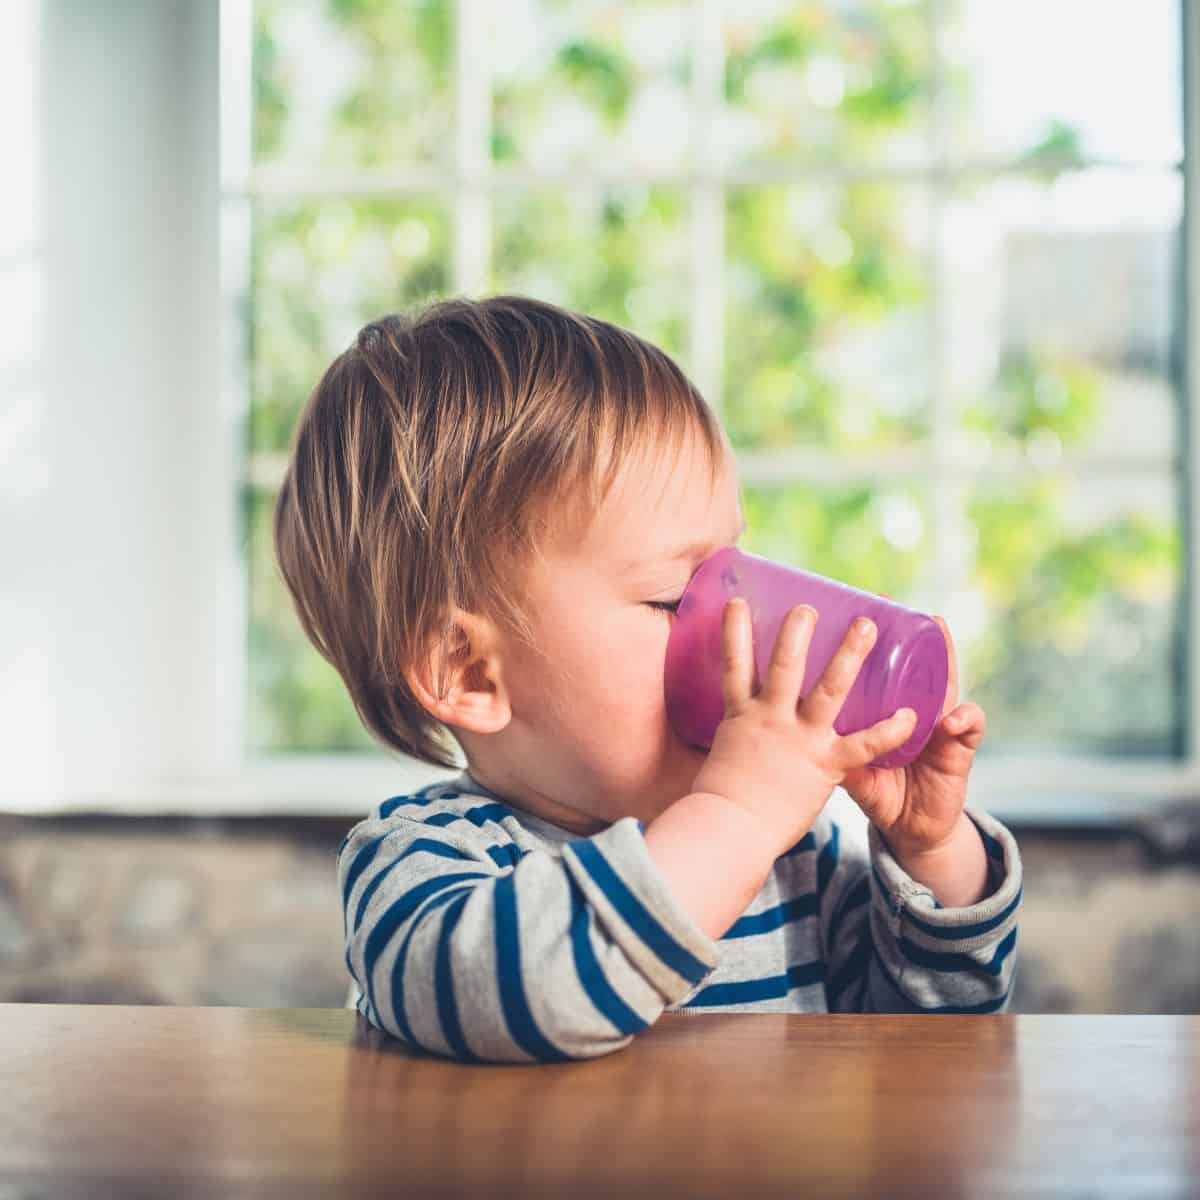 11, 12, and 13 months plus can be a difficult time to determine a toddler feeding schedule with so many transitions from baby food and bottles. Get these sample feeding schedules with milk for 1 year olds from a feeding expert and mom. 